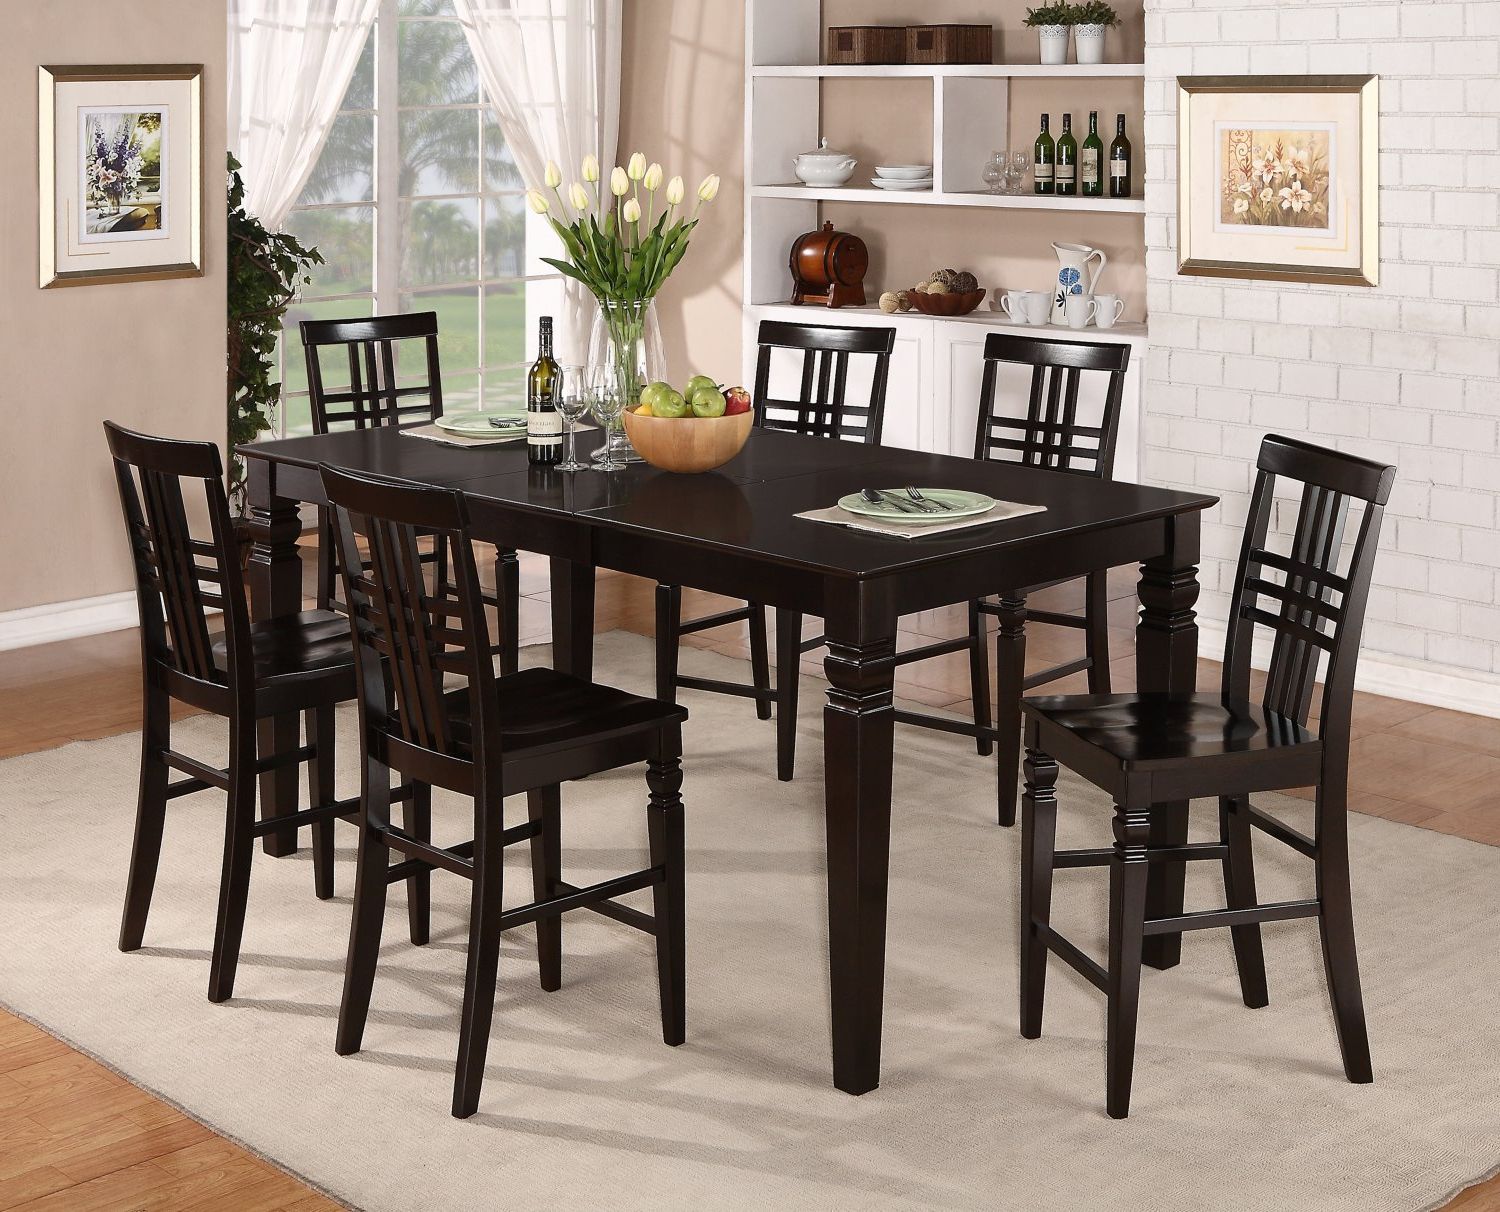 Widely Used 7 Pc Dinette Counter Height Table With 6 Wood Seat Chairs Regarding Dankrad Bar Height Dining Tables (View 4 of 20)